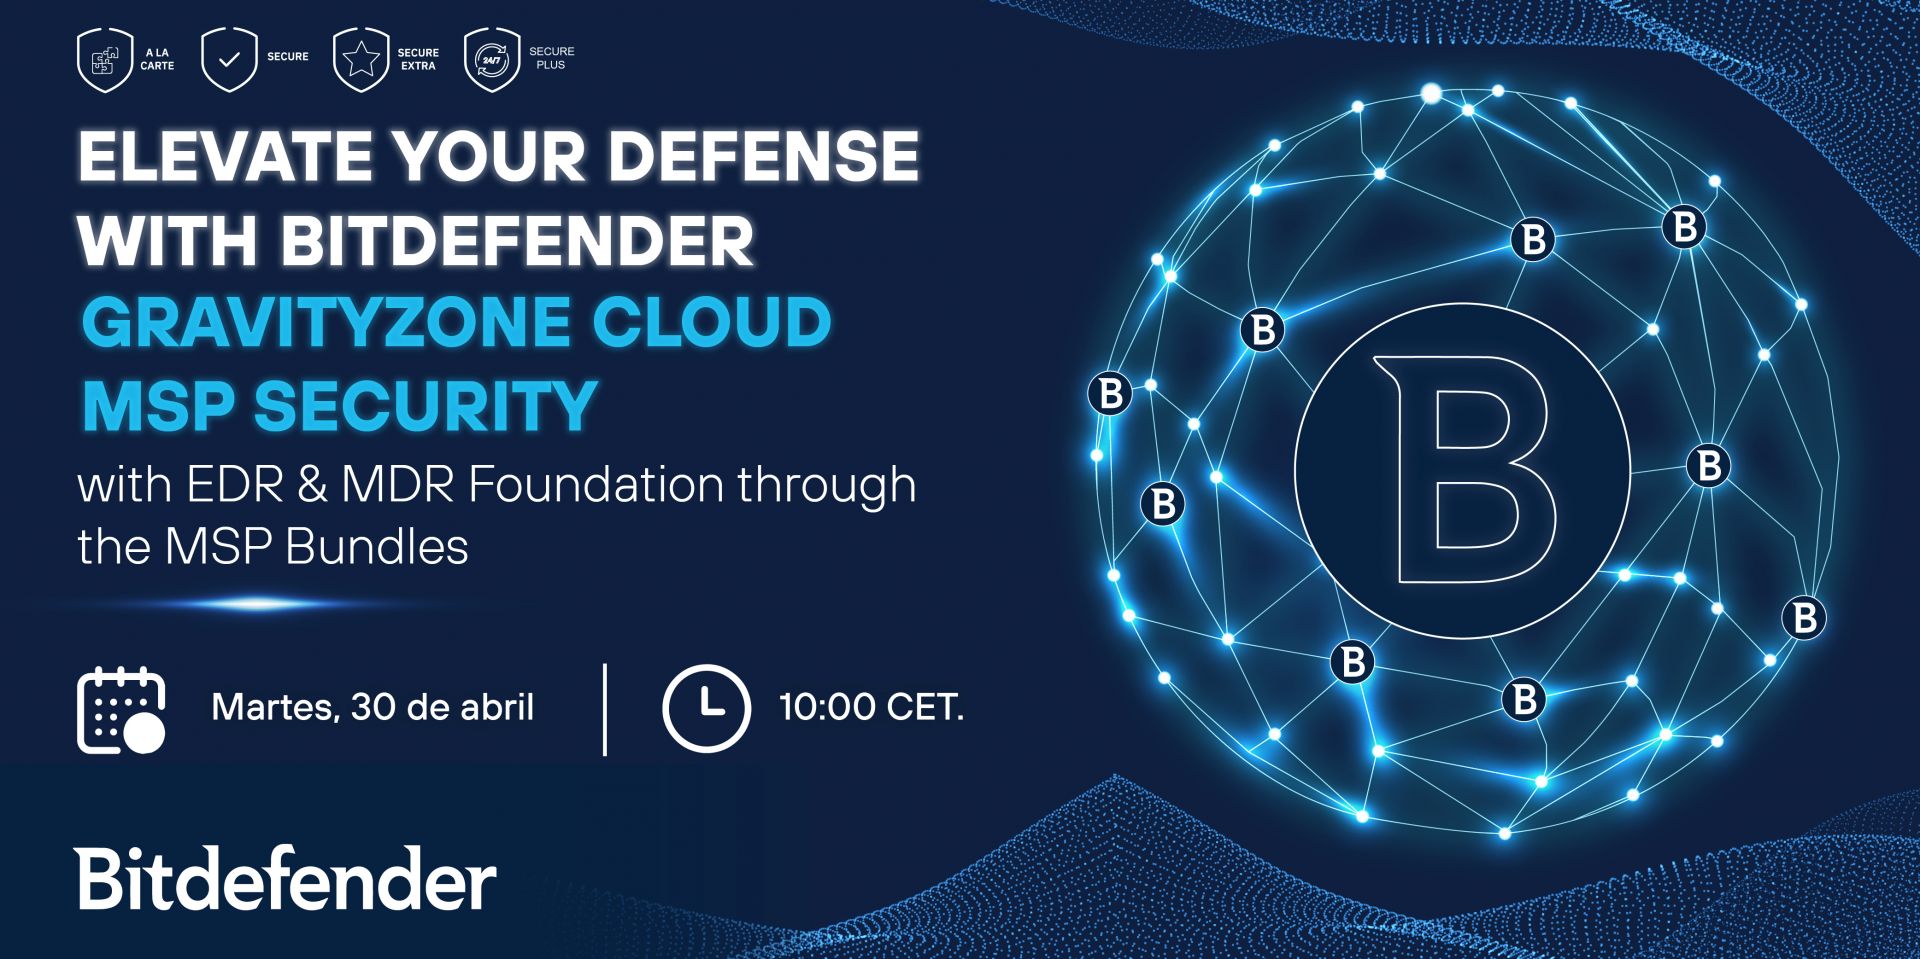 Elevate your Defense with Bitdefender GravityZone Cloud MSP Security with EDR & MDR Foundation through the MSP Bundles